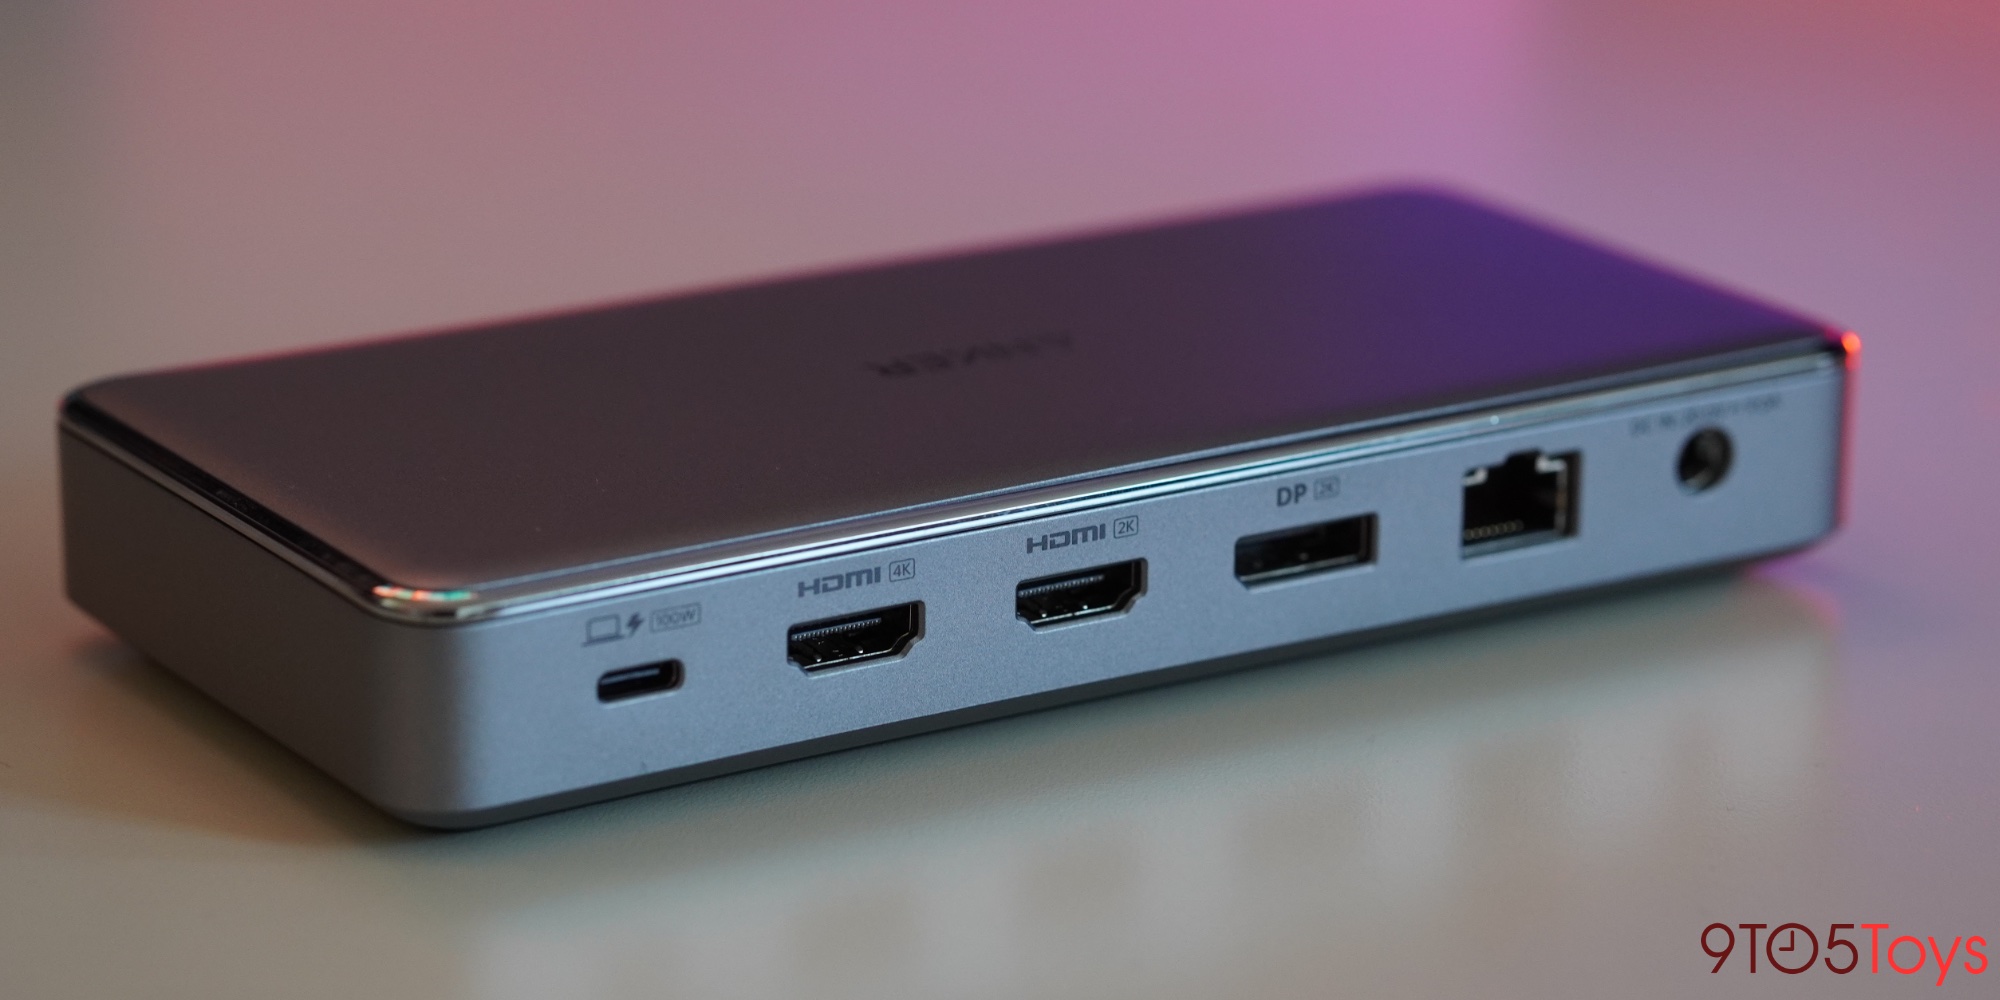 støn Canberra skuffe Anker triple monitor dock review: Made for Mac - 9to5Toys